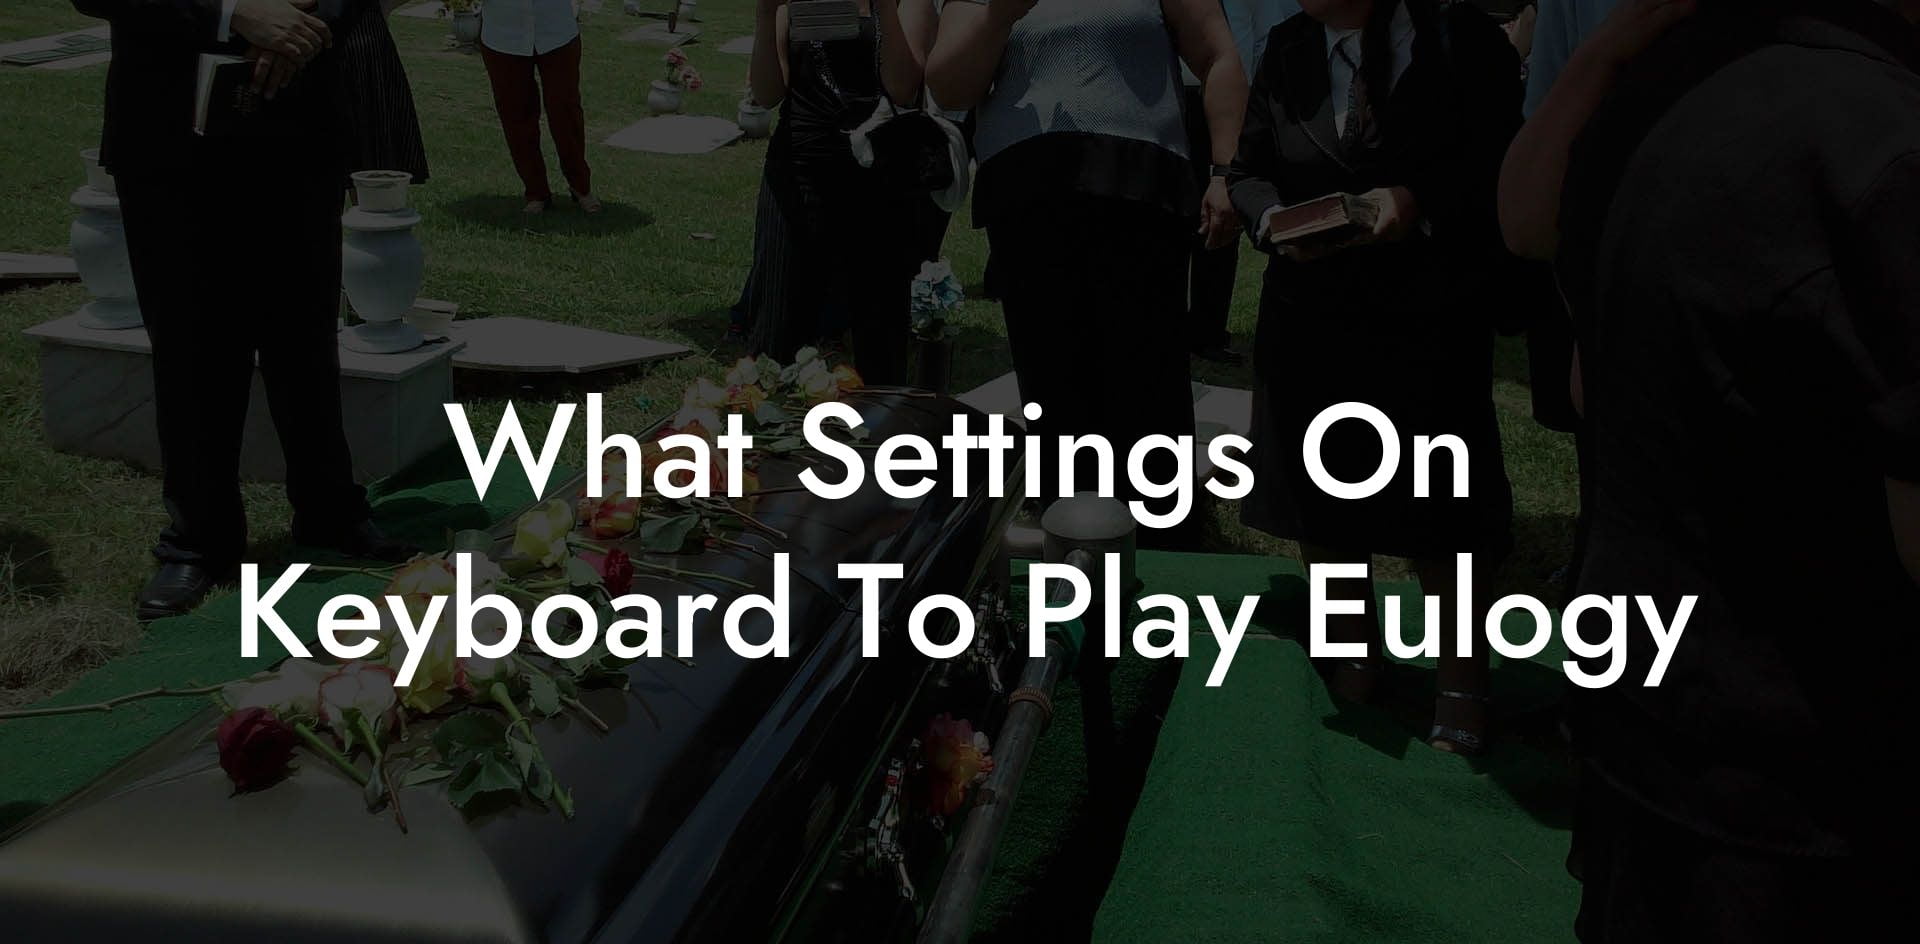 What Settings On Keyboard To Play Eulogy